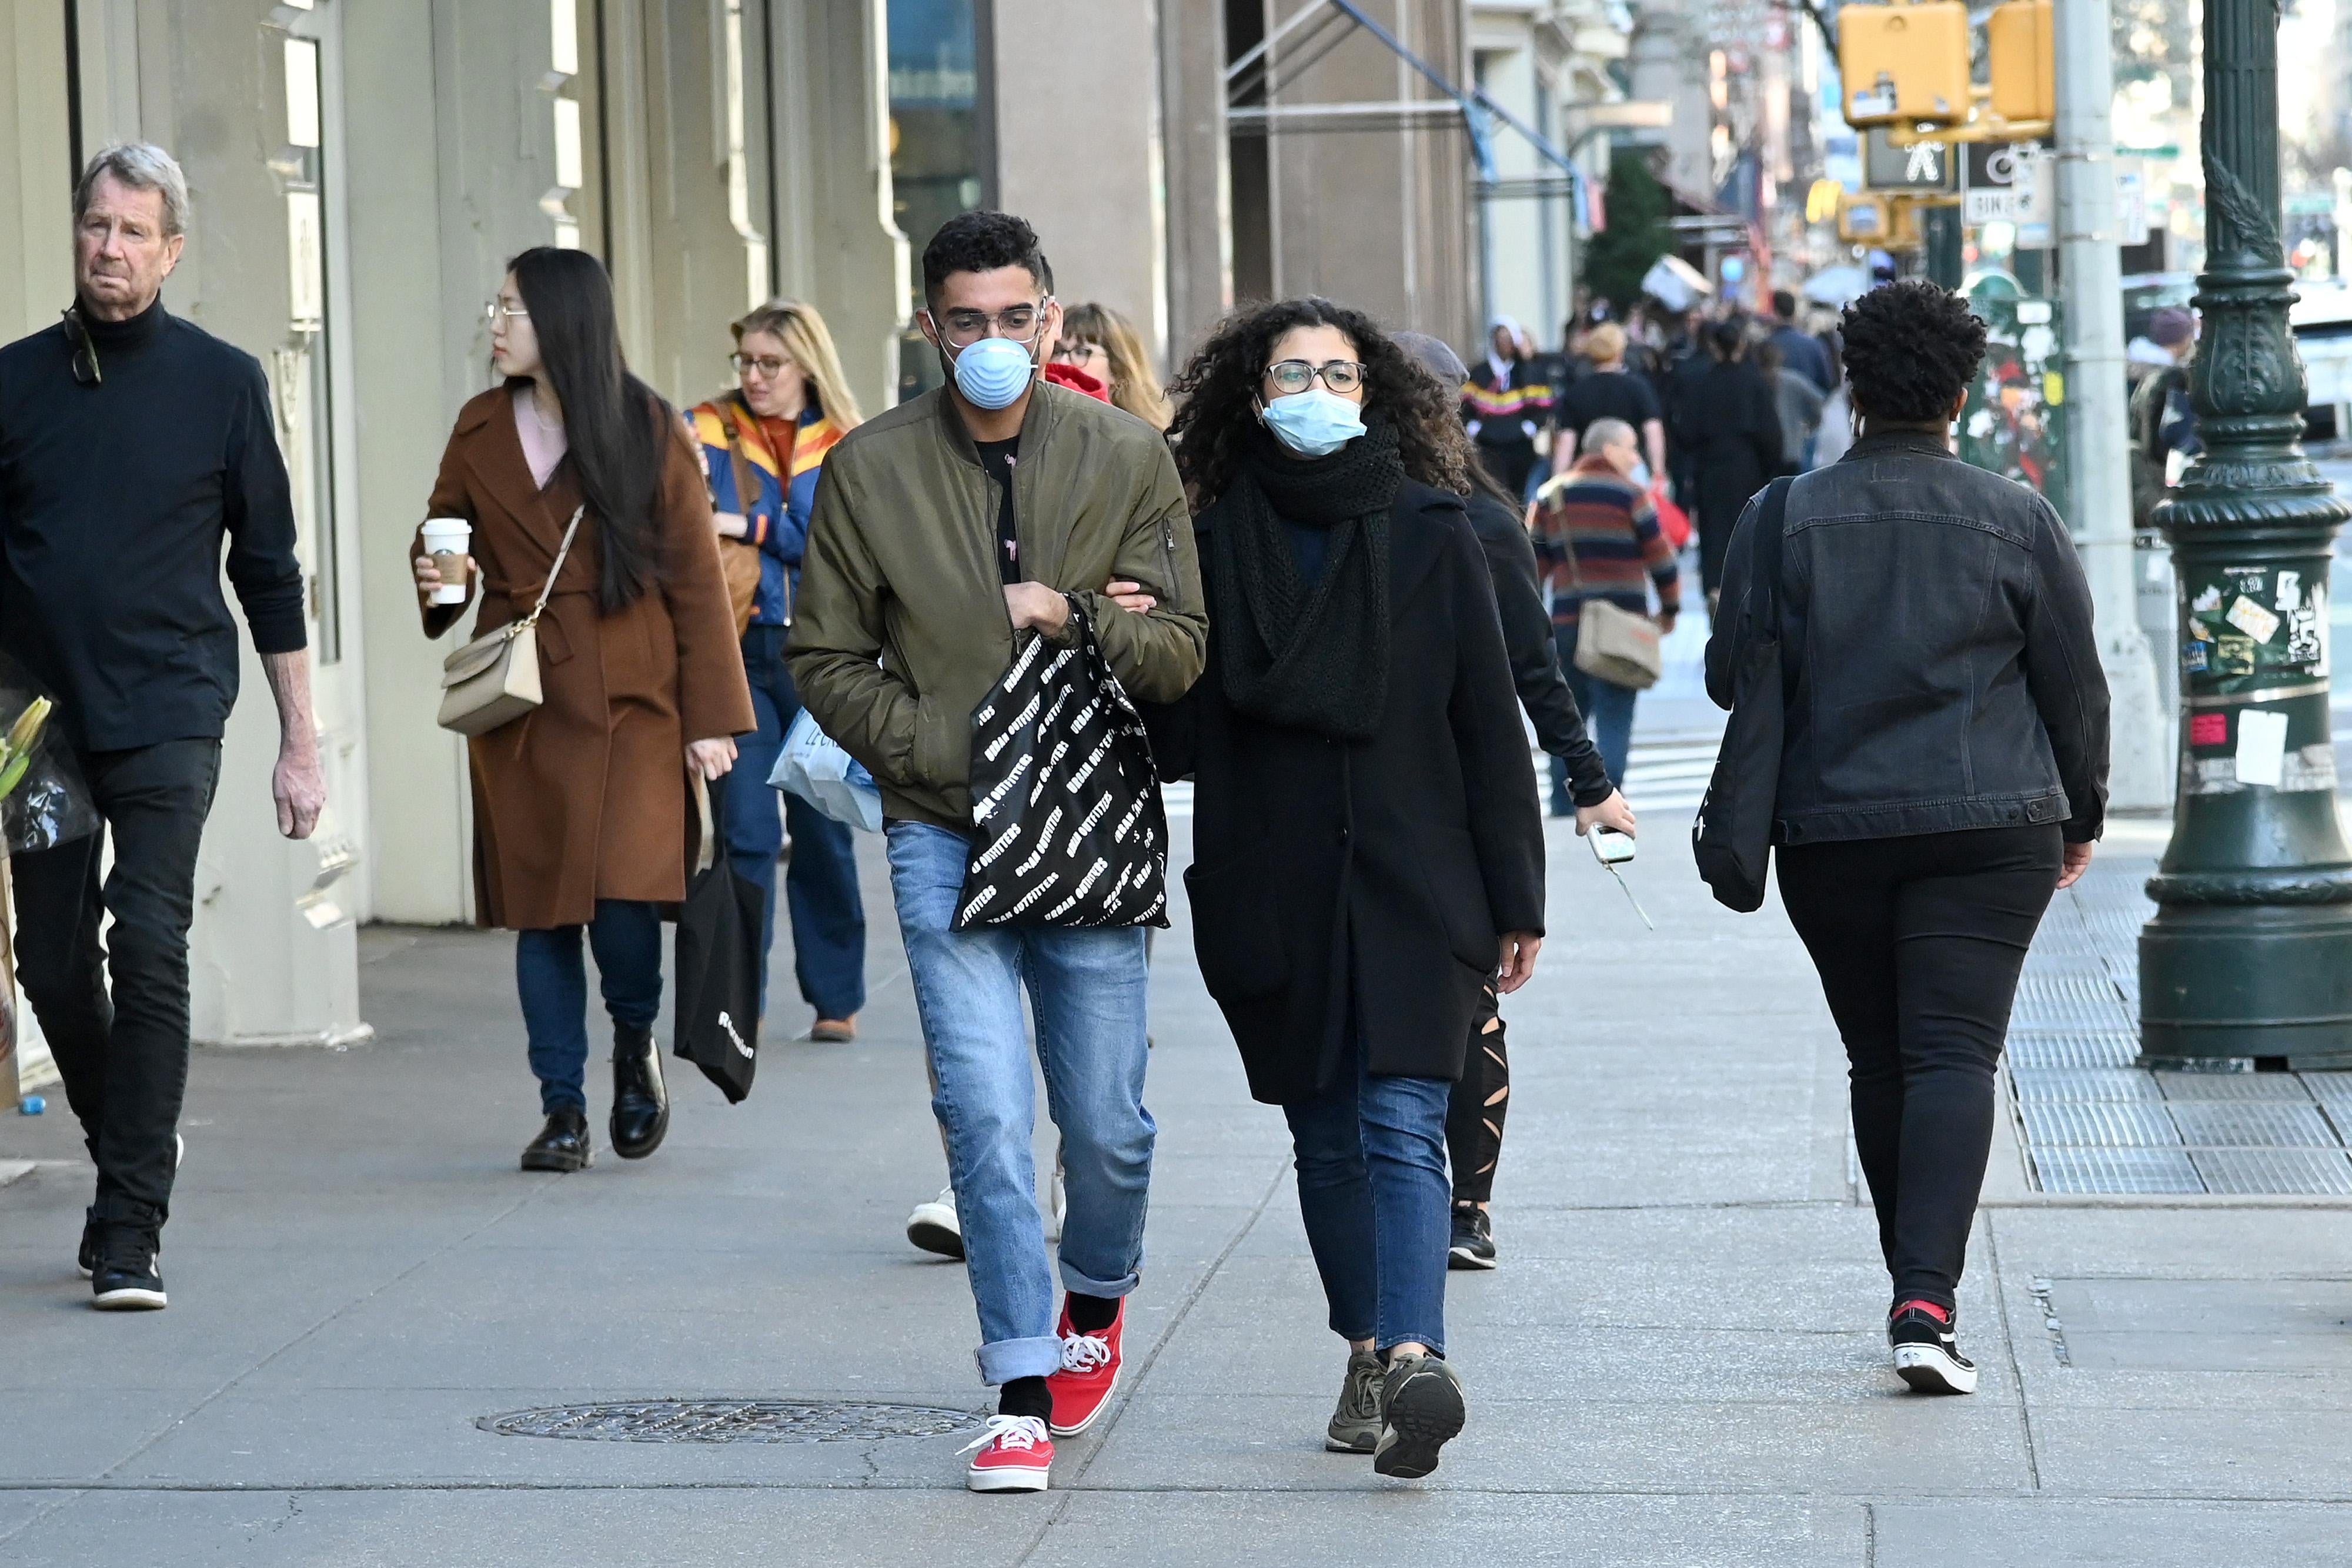 People wearing masks are seen as the coronavirus continues to spread across the United States on March 14, 2020 in New York City.